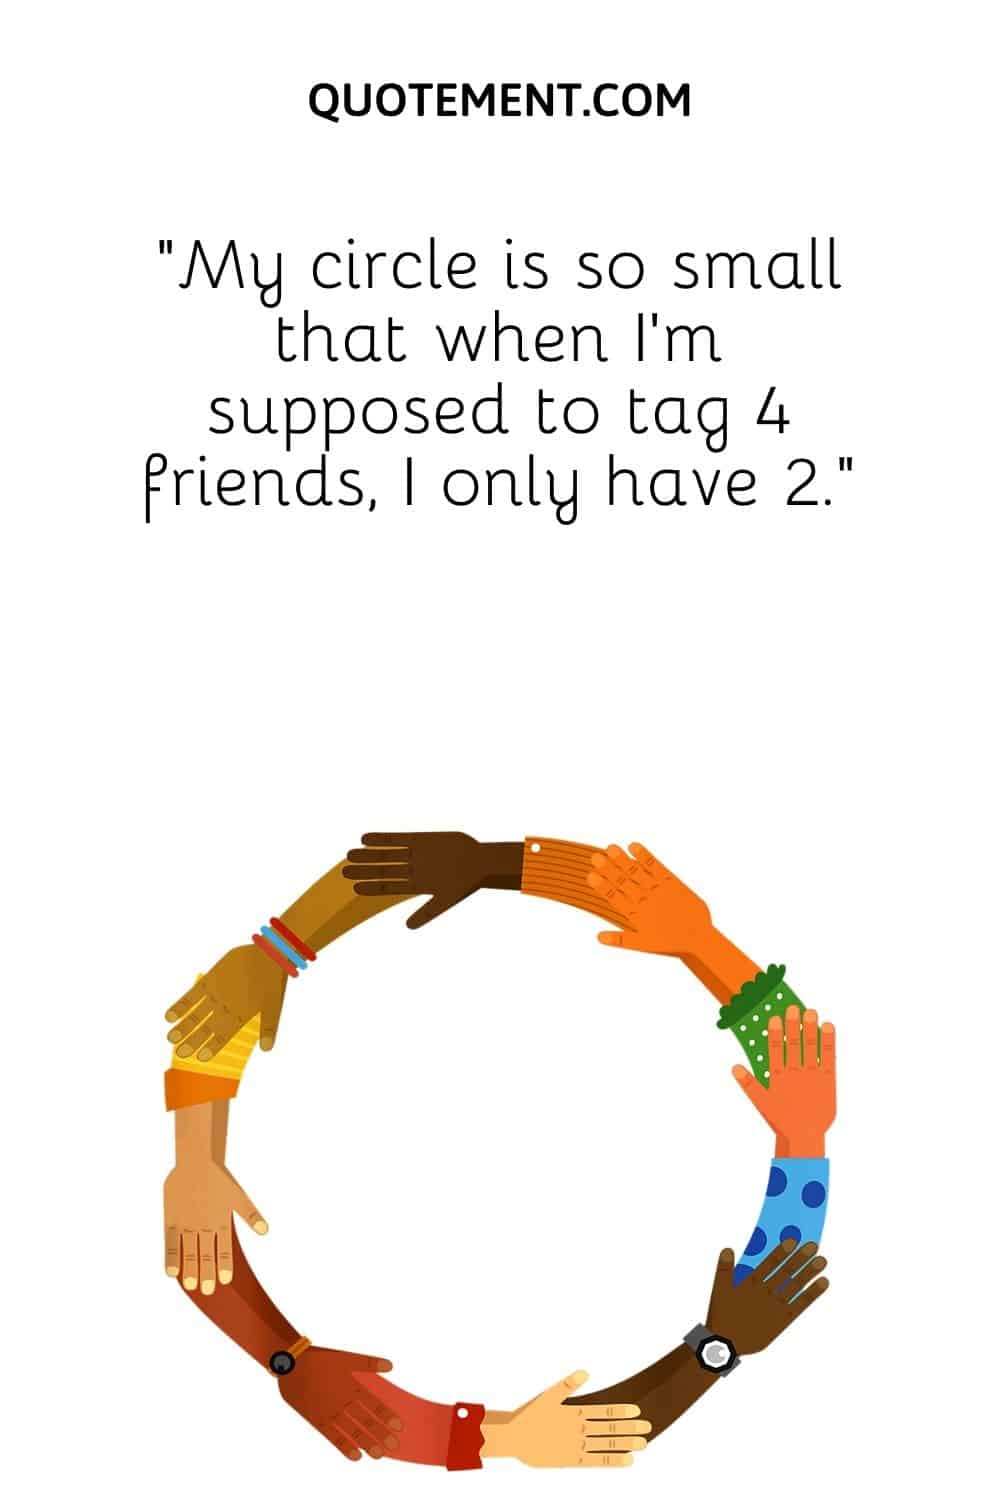 “My circle is so small that when I’m supposed to tag 4 friends, I only have 2.”